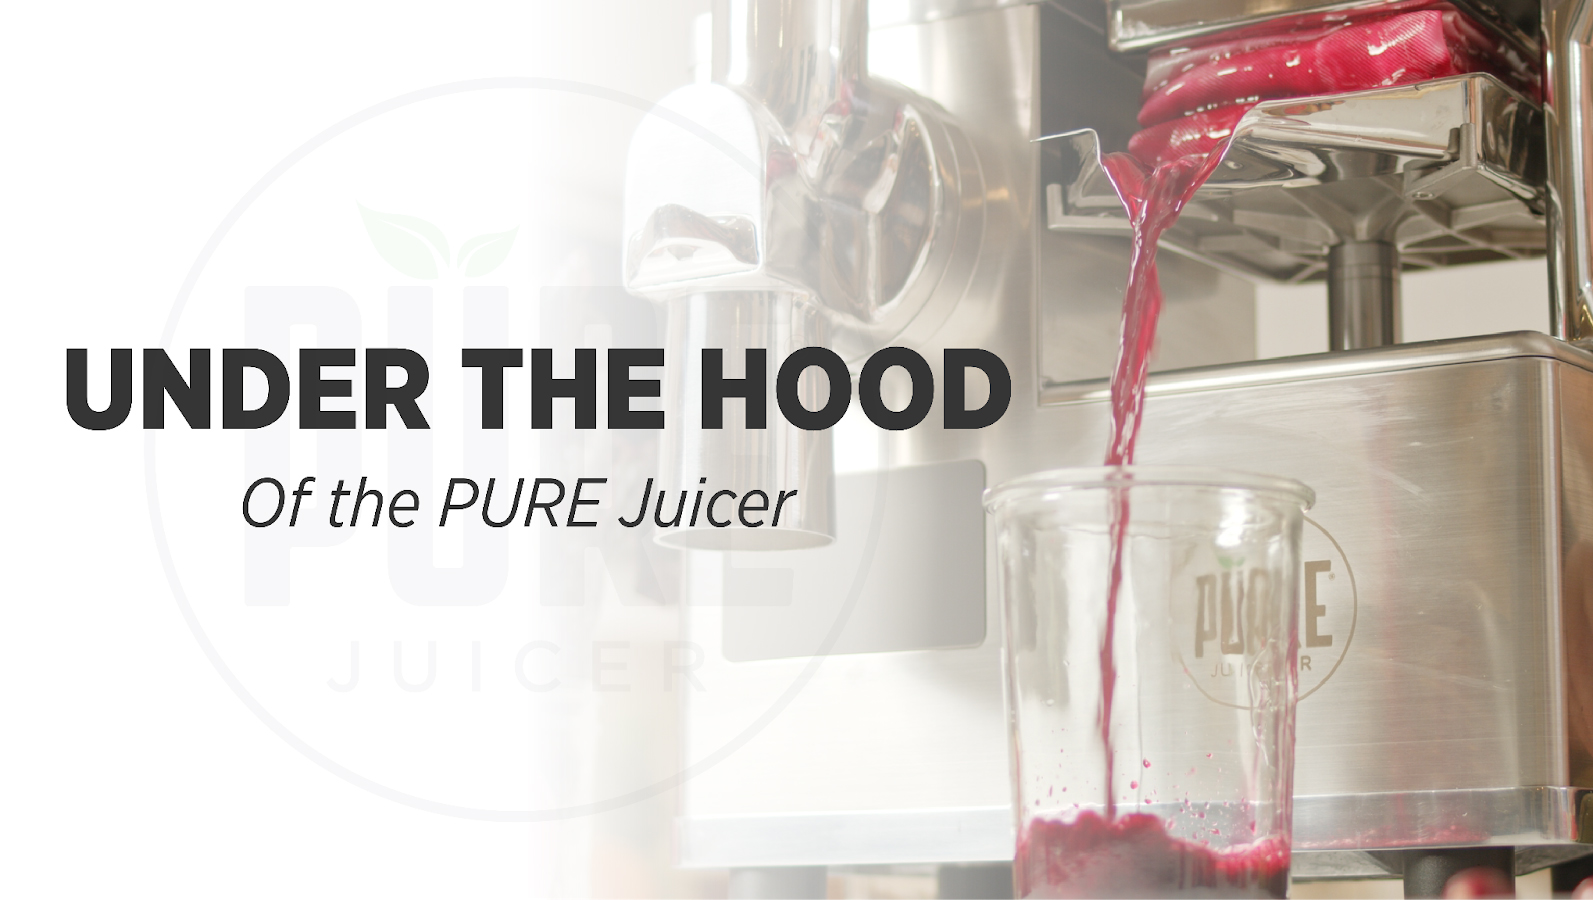 Under the Hood of the PURE Juicer